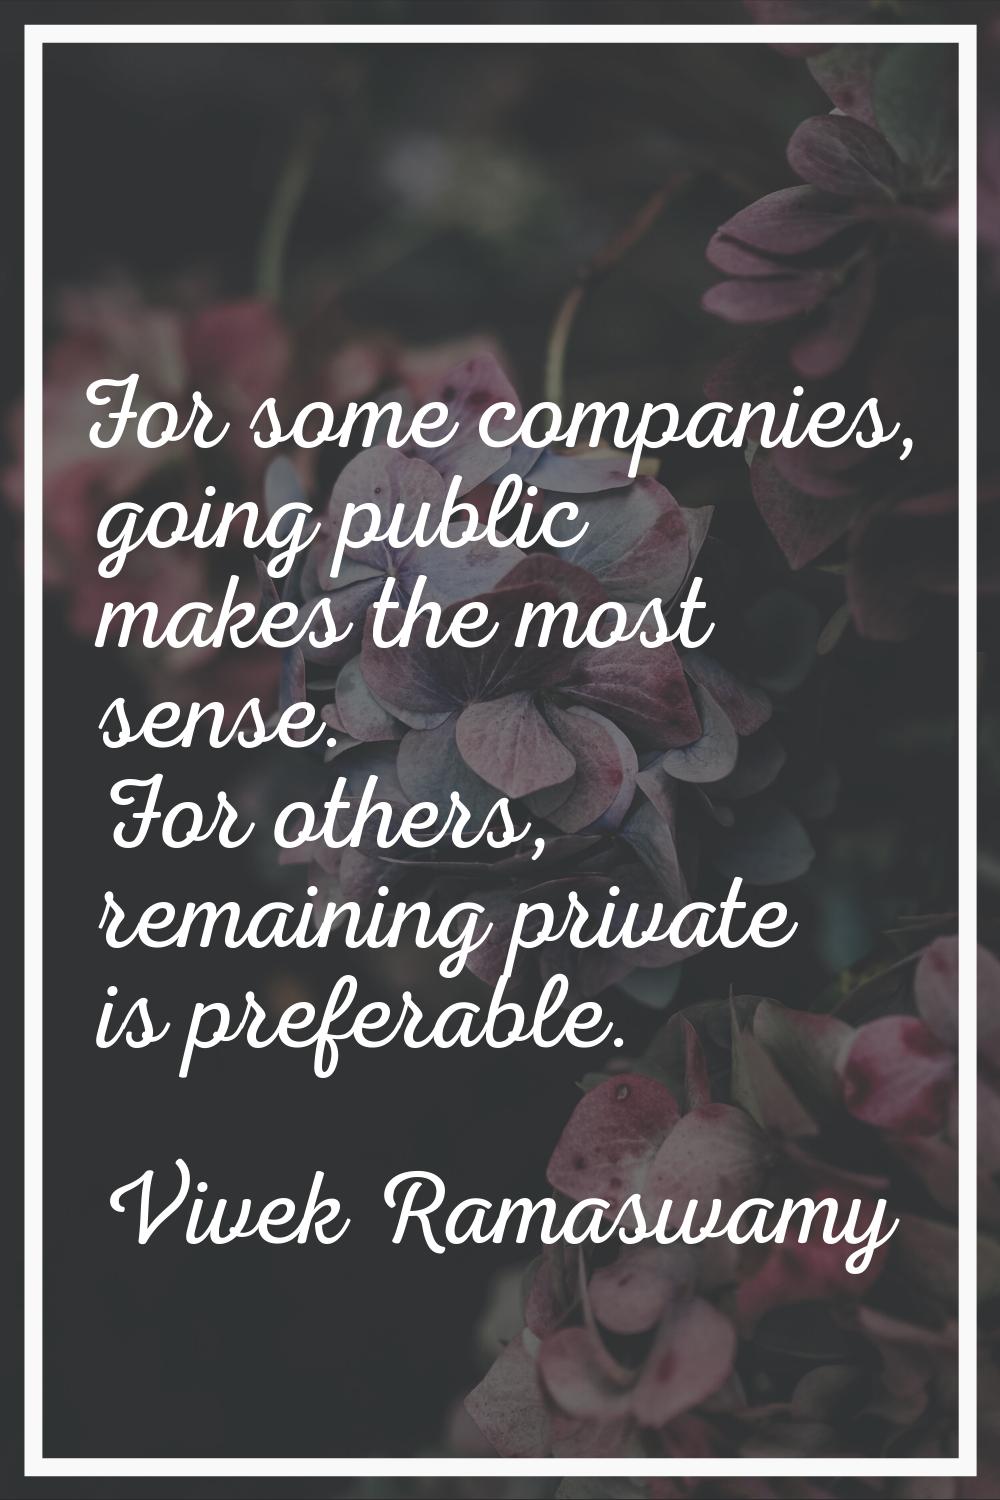 For some companies, going public makes the most sense. For others, remaining private is preferable.